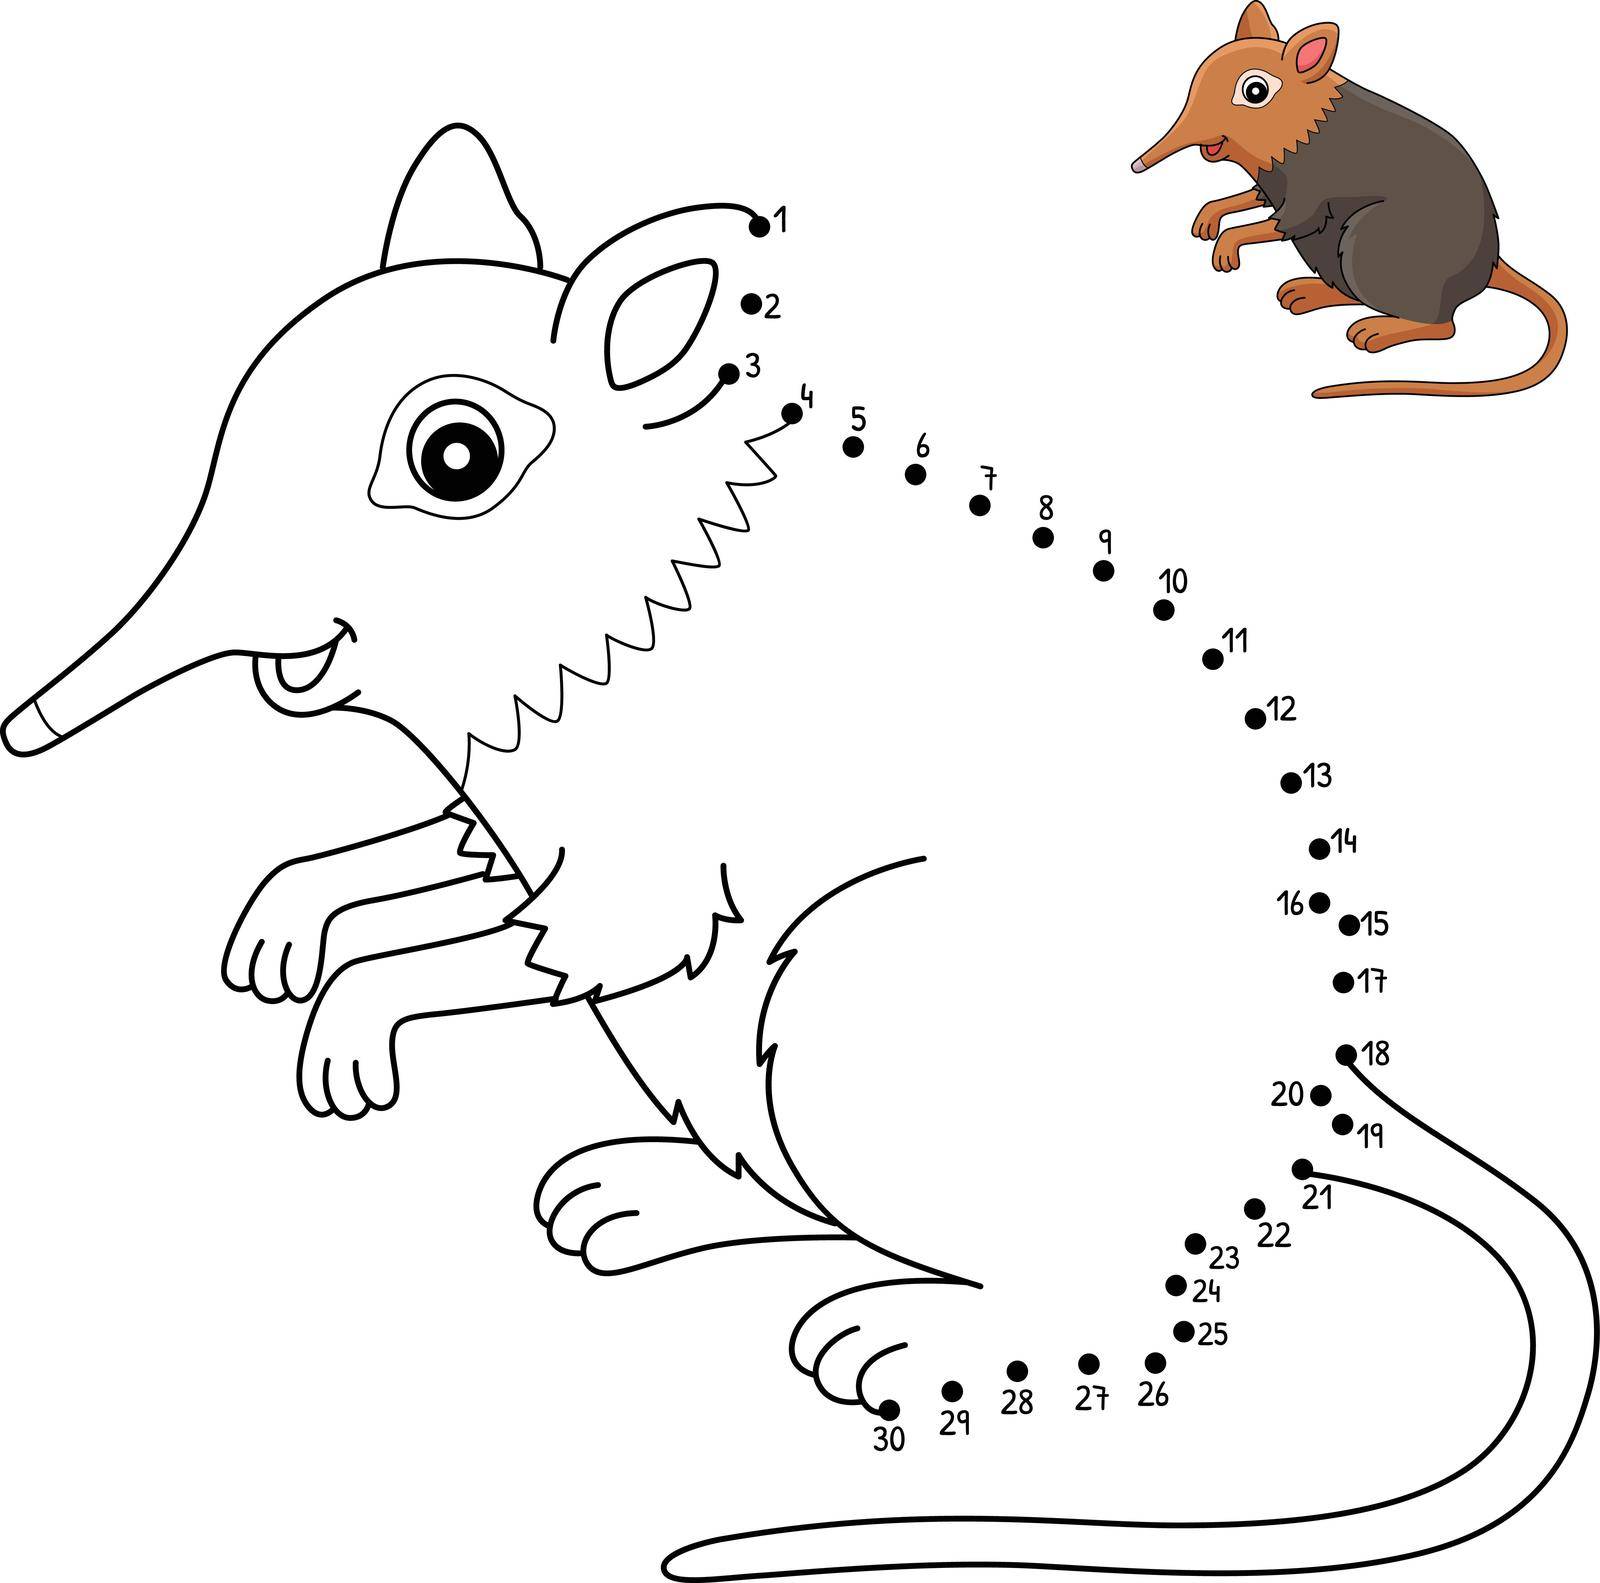 A cute and funny connect-the-dots coloring page of an Elephant Shrew. Provides hours of coloring fun for children. Color, this page is very easy. Suitable for little kids and toddlers.